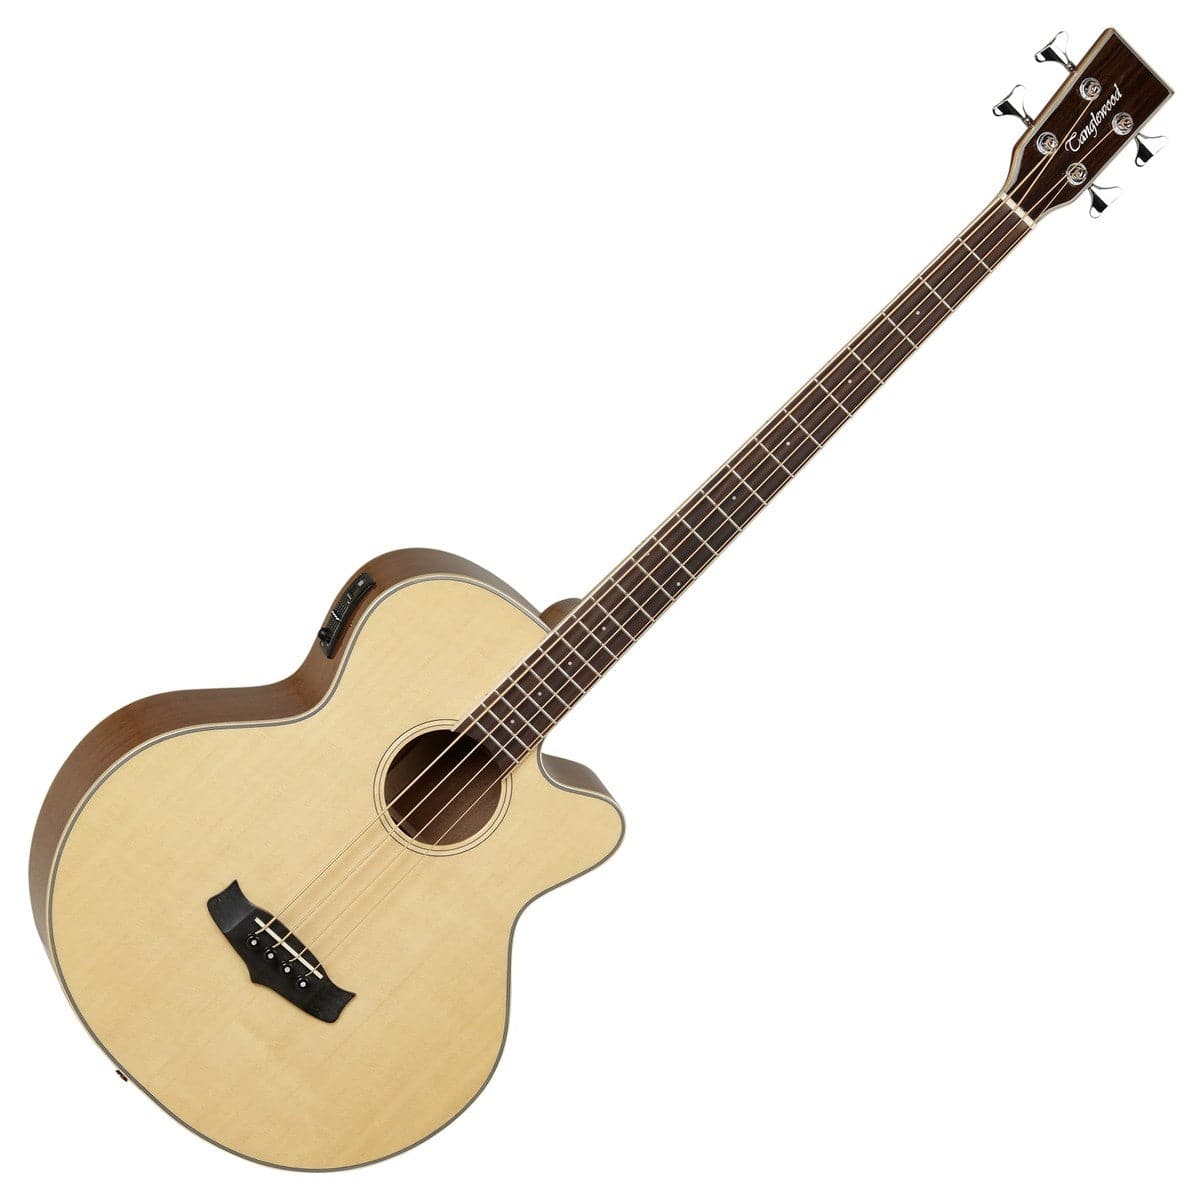 Tanglewood TW8 Winterleaf Electro Acoustic Bass Guitar - Natural